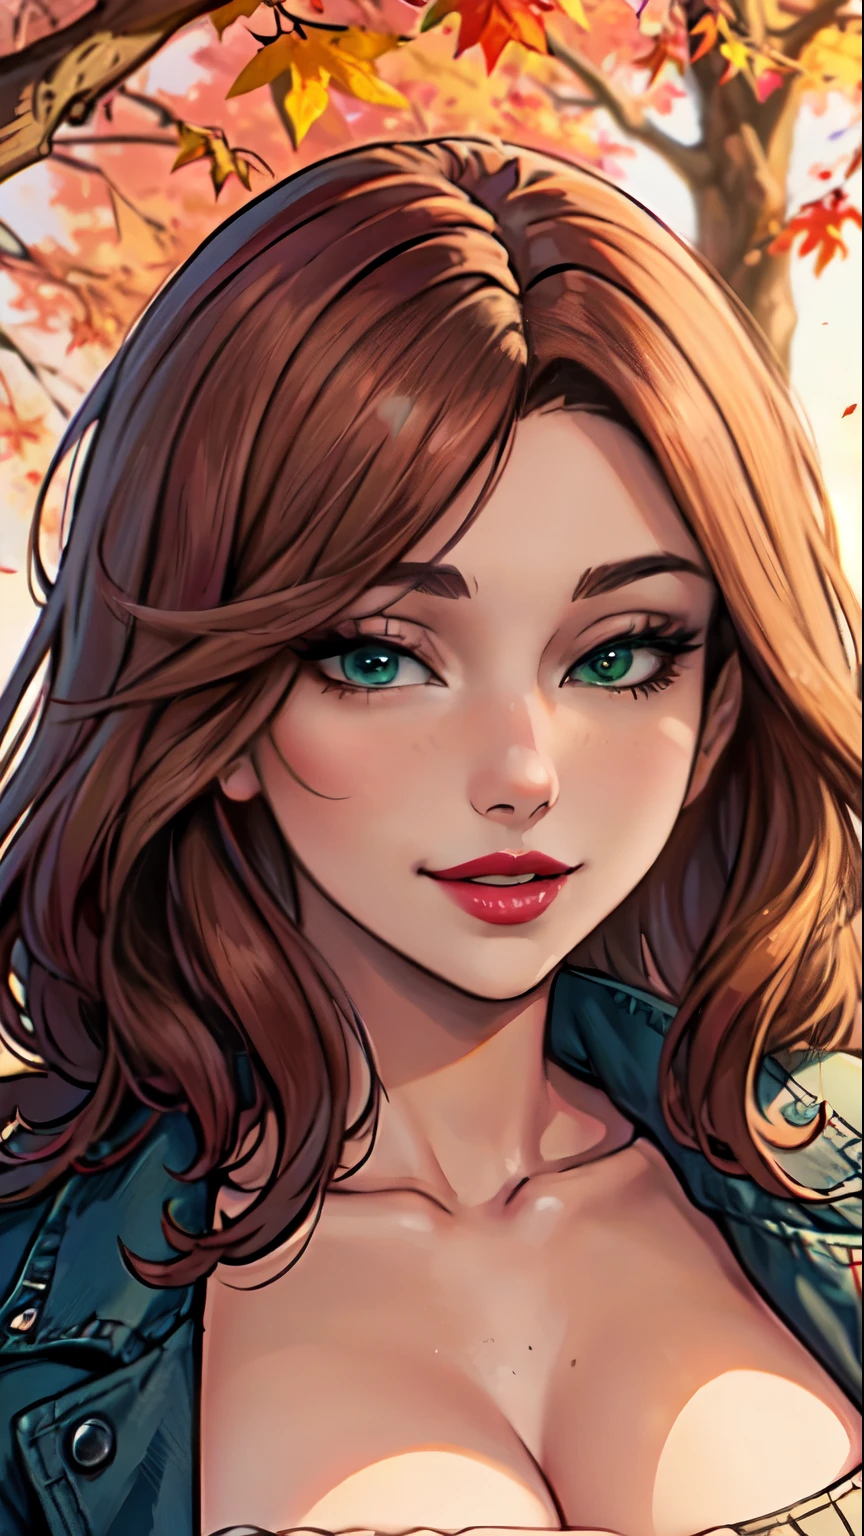 Masterpiece, raw,  beautiful art, professional artist, 8k, art style by sciamano240, very detailed face, very detailed hair, (1girl), caressing each other, perfectly drawn body, beautiful face, long brown hair , very detailed light green eyes , rosey cheeks, intricate details in eyes, sultry smile, looking directly at viewer , lusty expression, lipstick, very close up on face, wearing jacket ,sweater, sunny fall setting, 